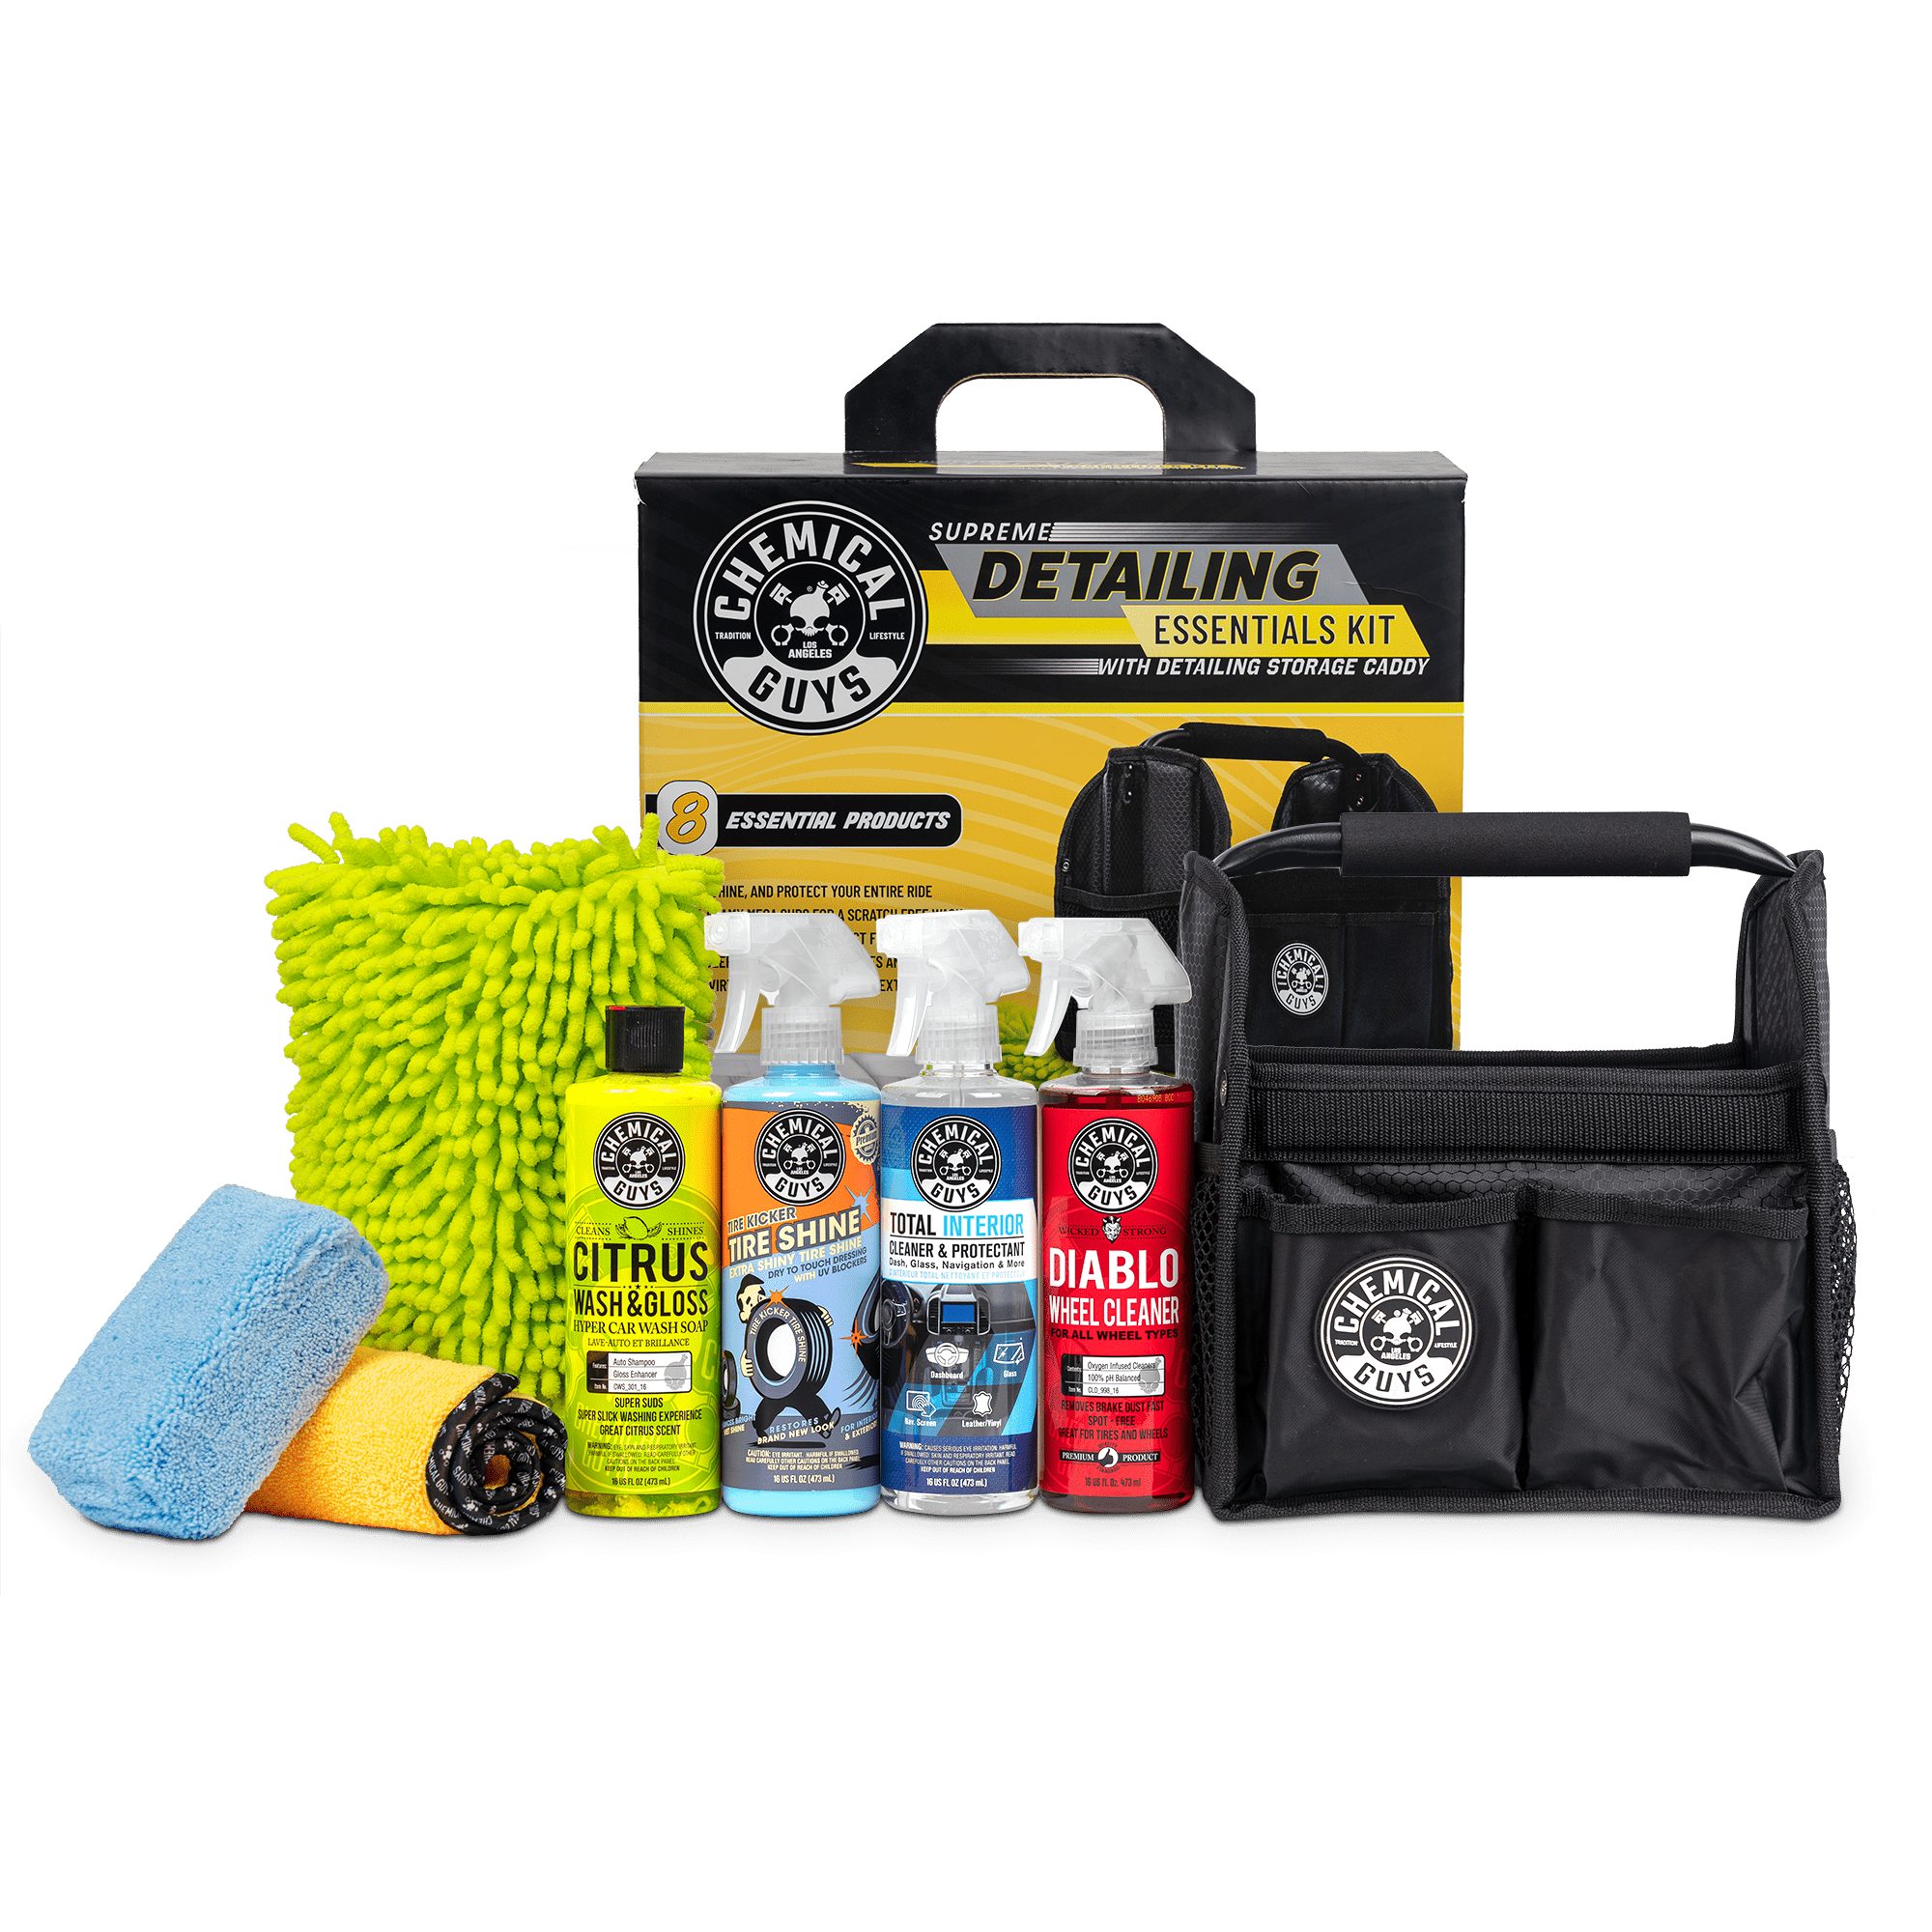 8-Piece Chemical Guys Supreme Detailing Essentials Kit with Detailing Storage Caddy $29 & More + Free S&H w/ Walmart+ or $35+